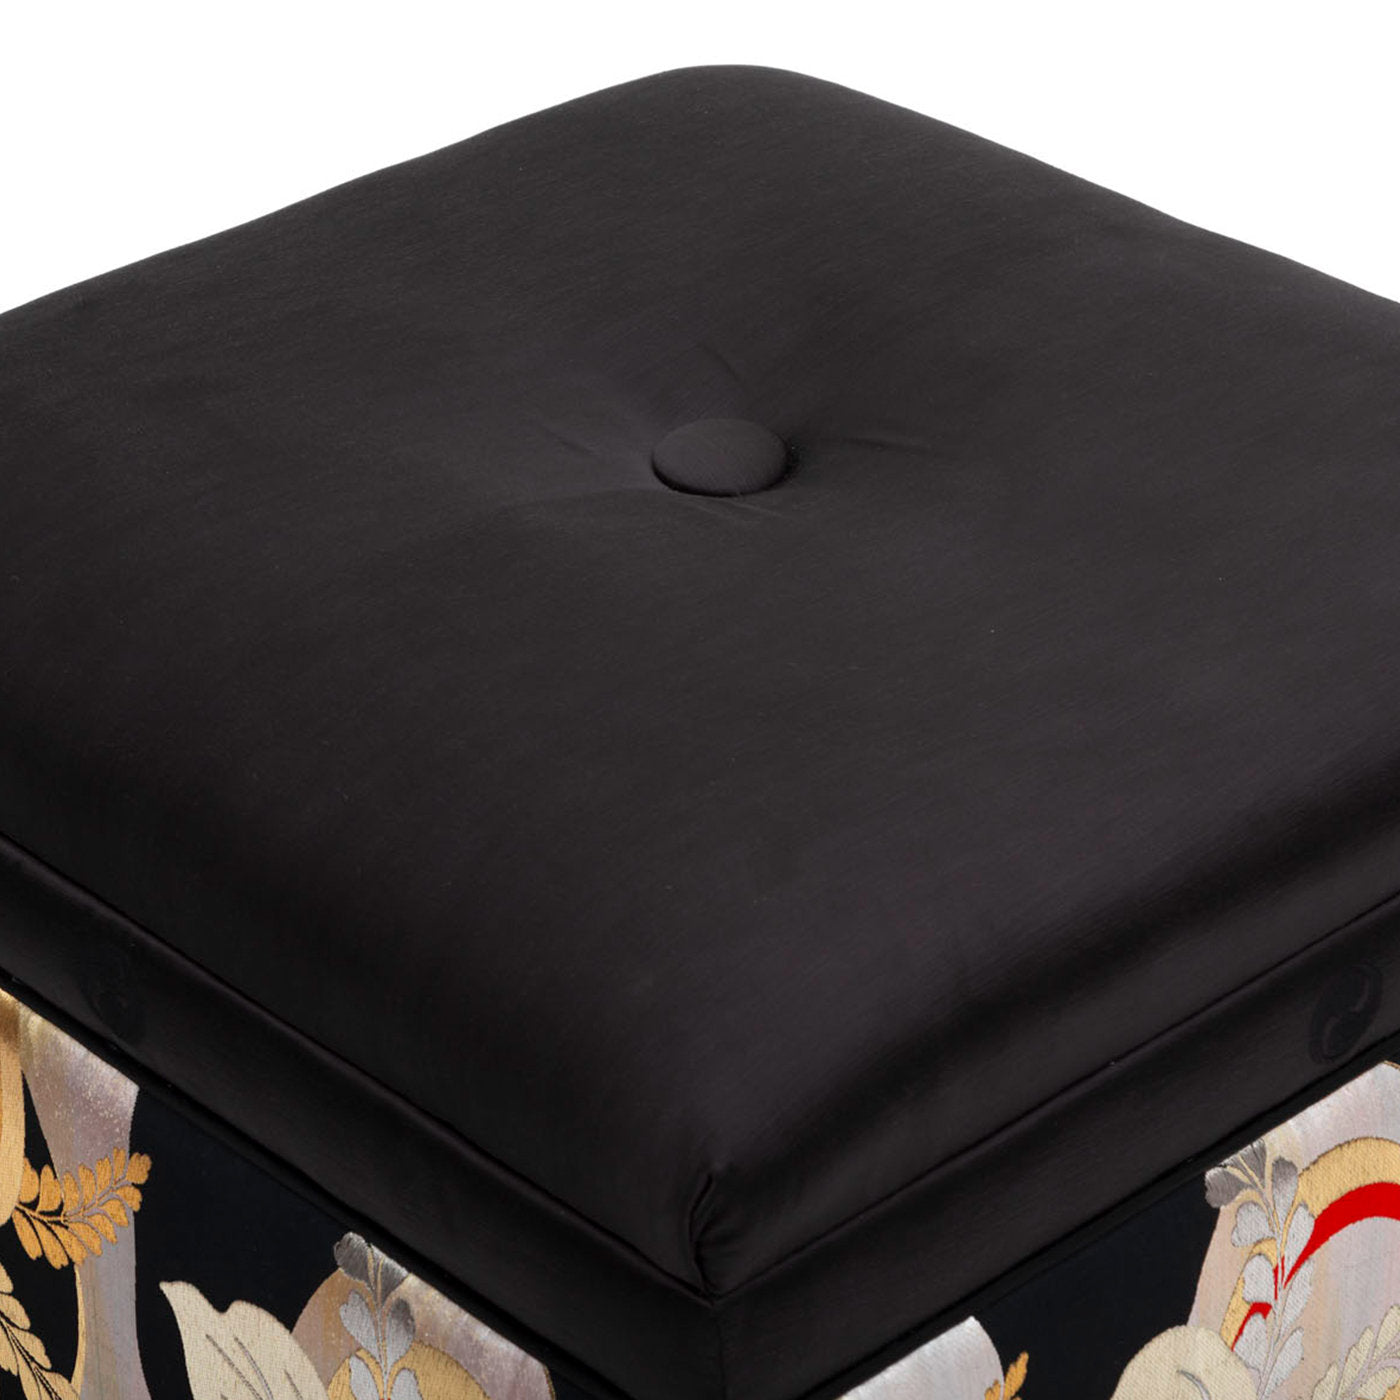 Ottoman Covered With Antique Japanese Obi Sashes  - Alternative view 4